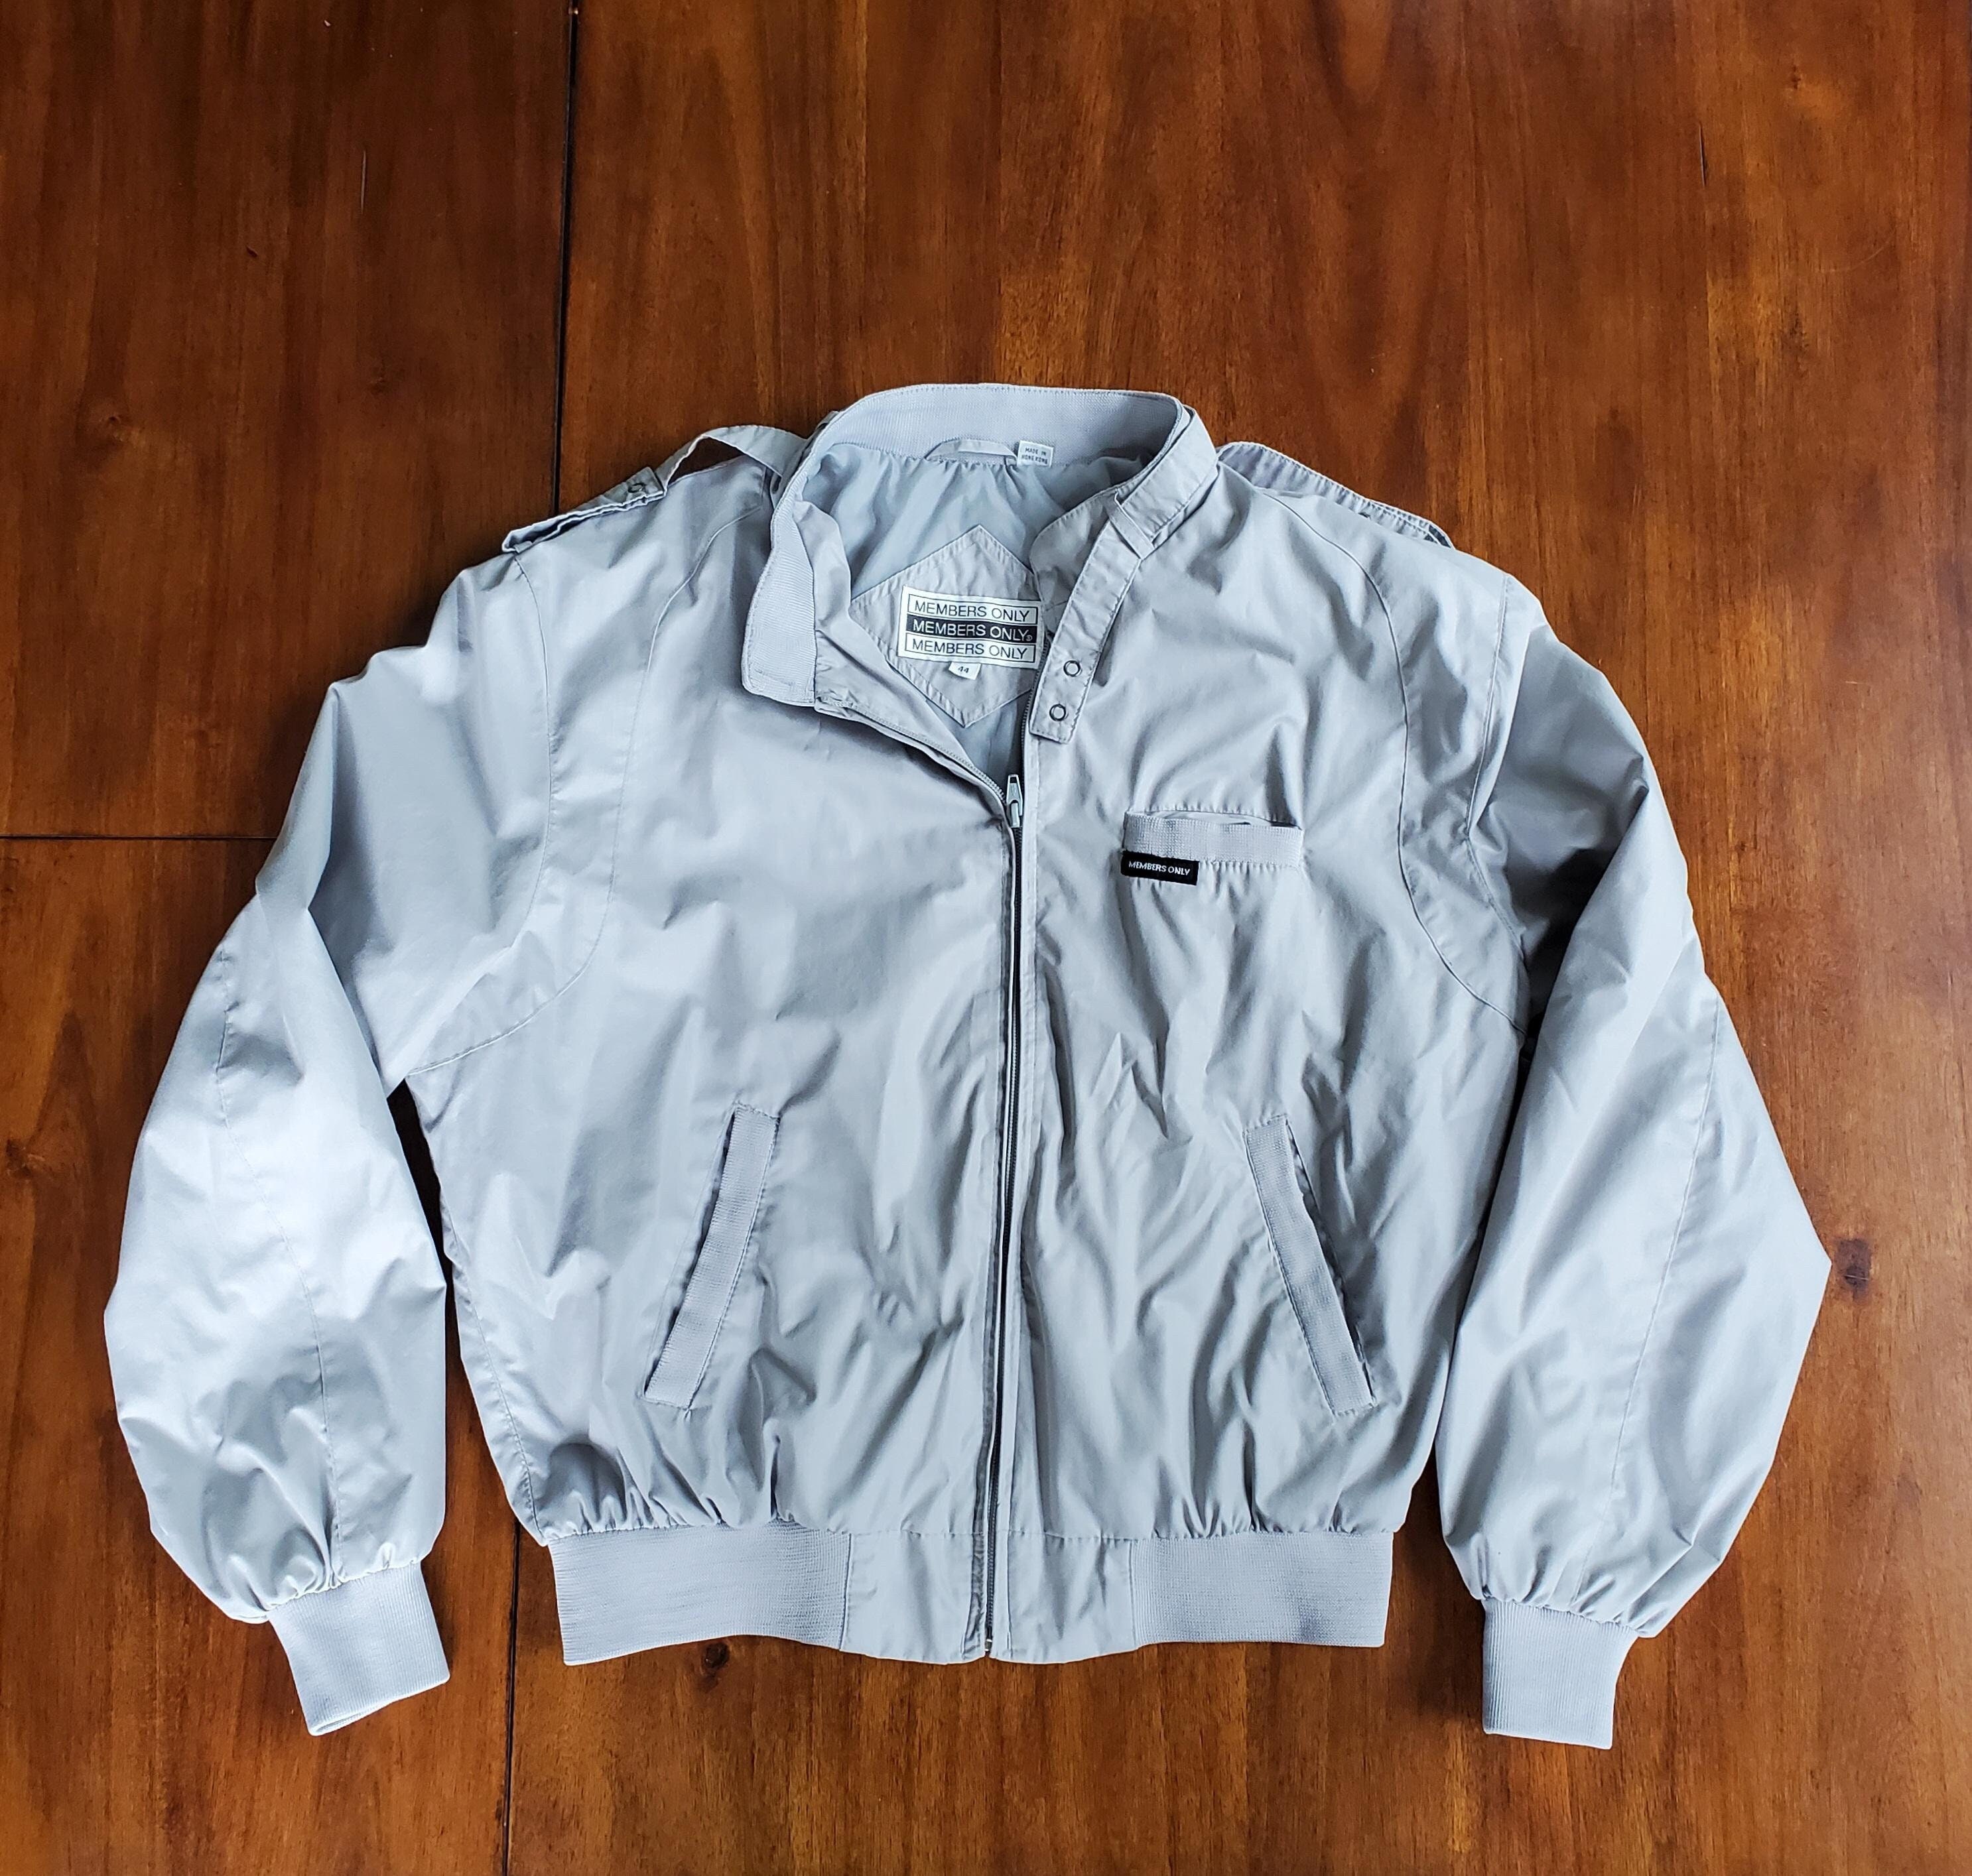 RETRO 80'S MEMBERS ONLY JACKET SIZE 1X